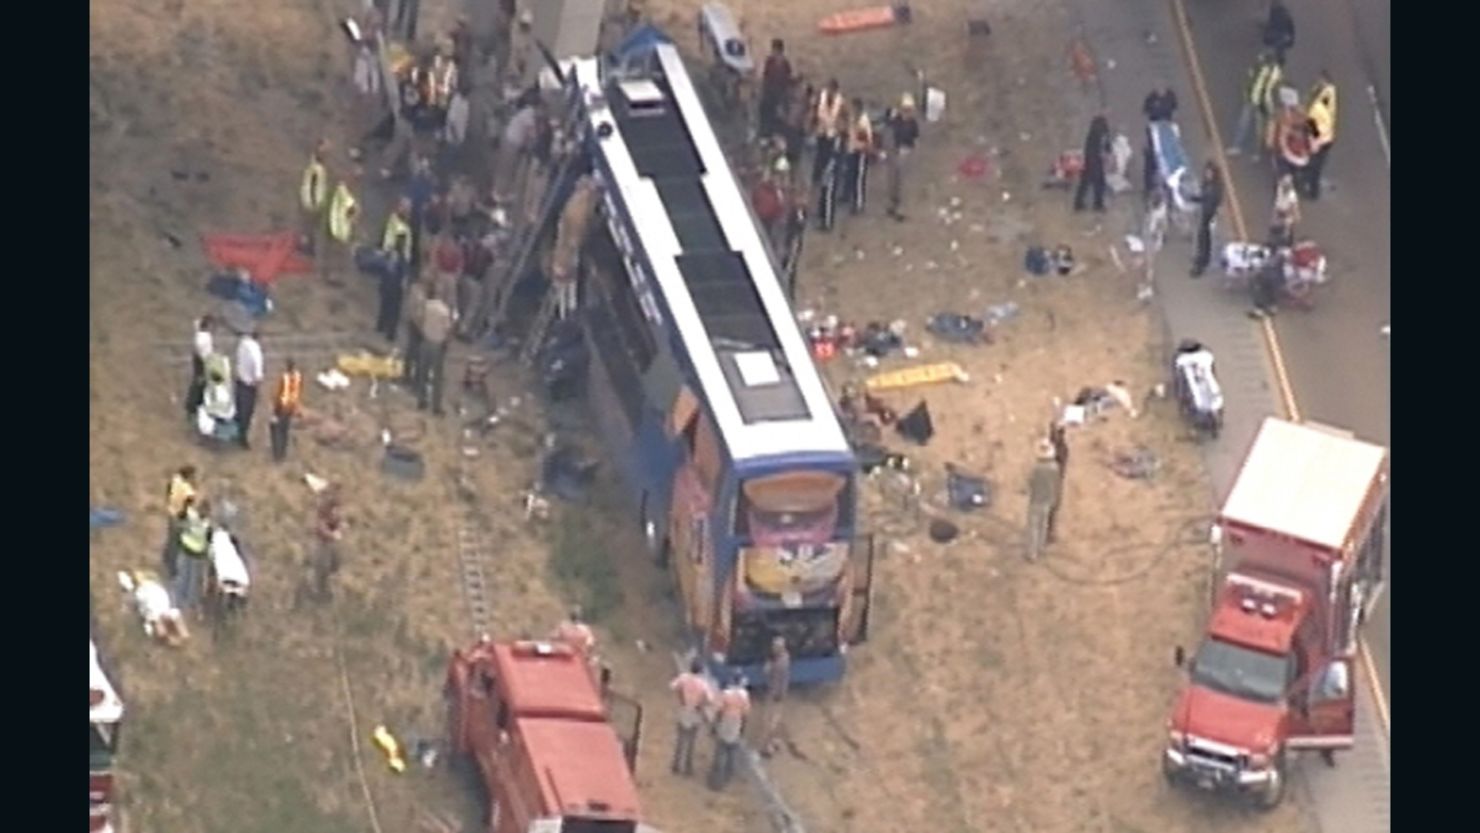 One person was killed and several were injured after a Megabus crashed in Illinois, Thursday.